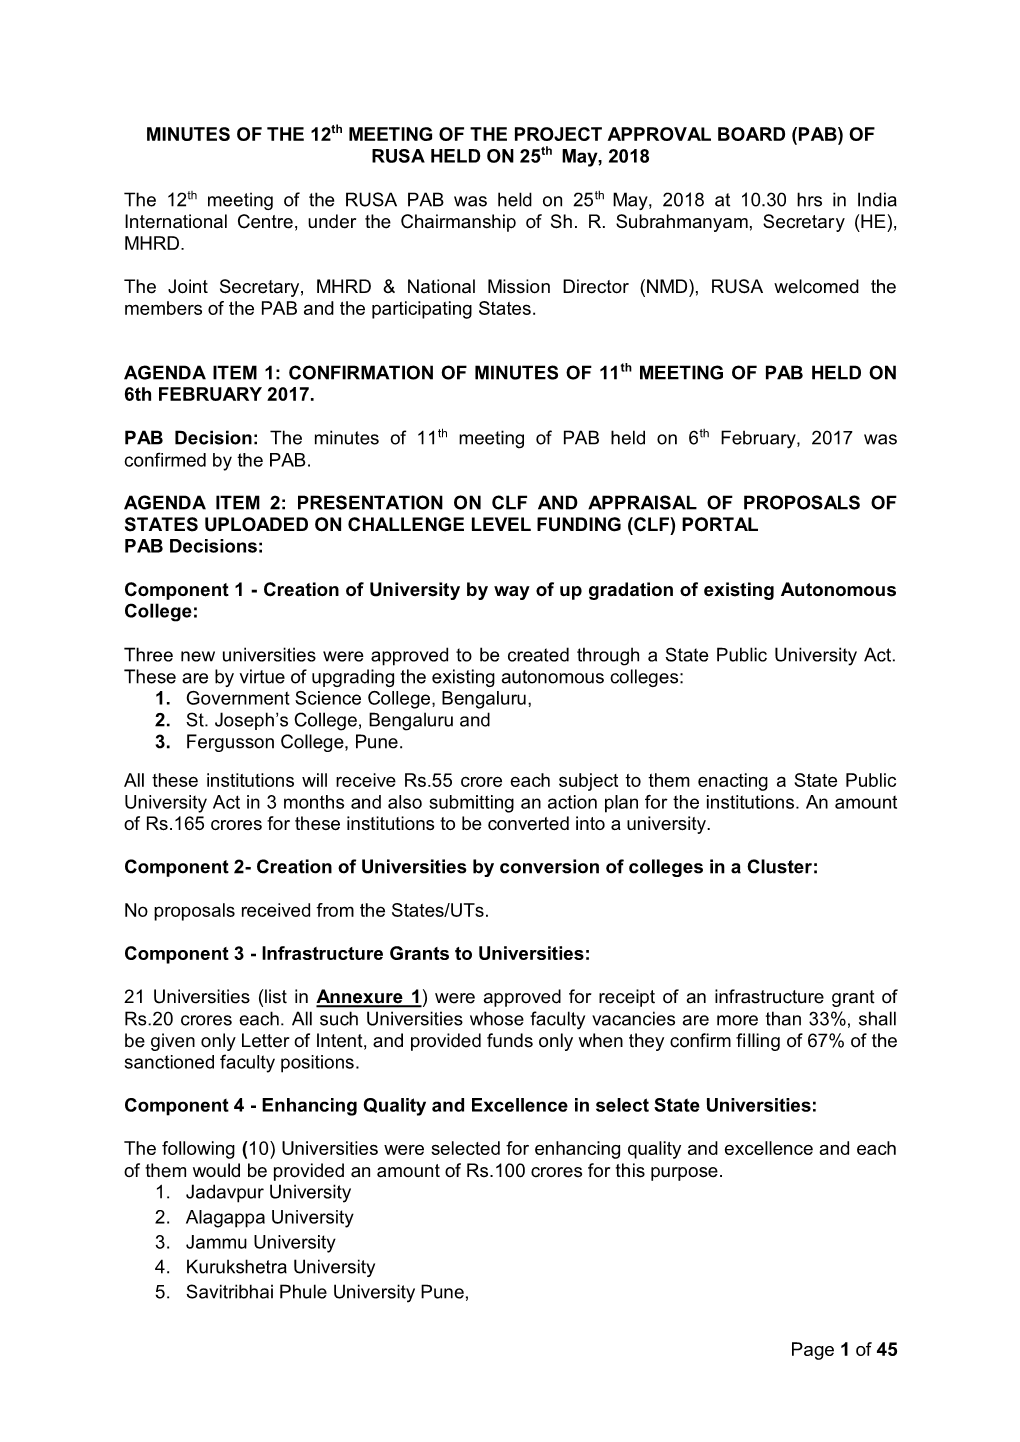 Page 1 of 45 MINUTES of the 12Th MEETING of the PROJECT APPROVAL BOARD (PAB) of RUSA HELD on 25Th May, 2018 the 12Th Meeting Of